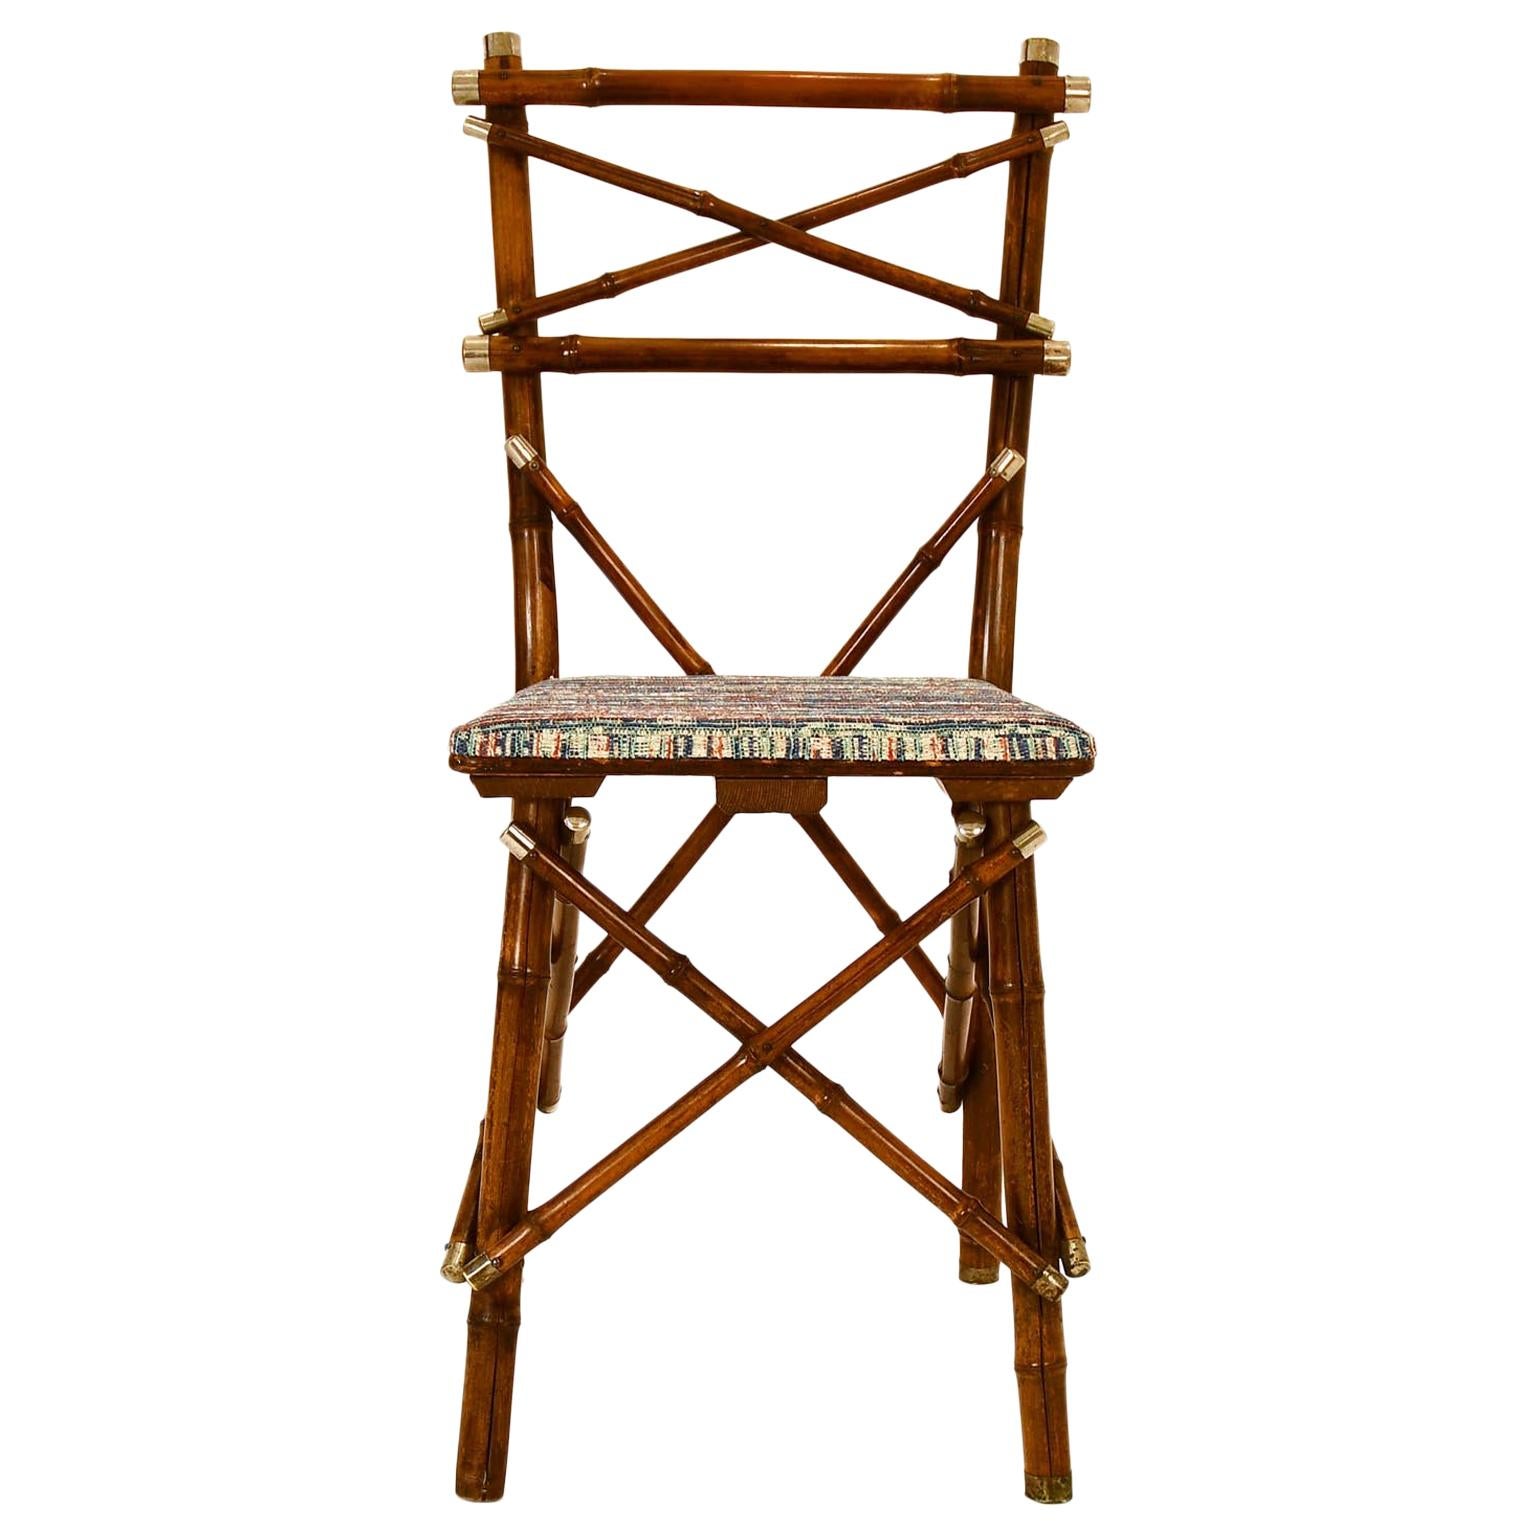 Decorative Early 20th Century Bamboo Chair, Upholstery, Austria, 1910s